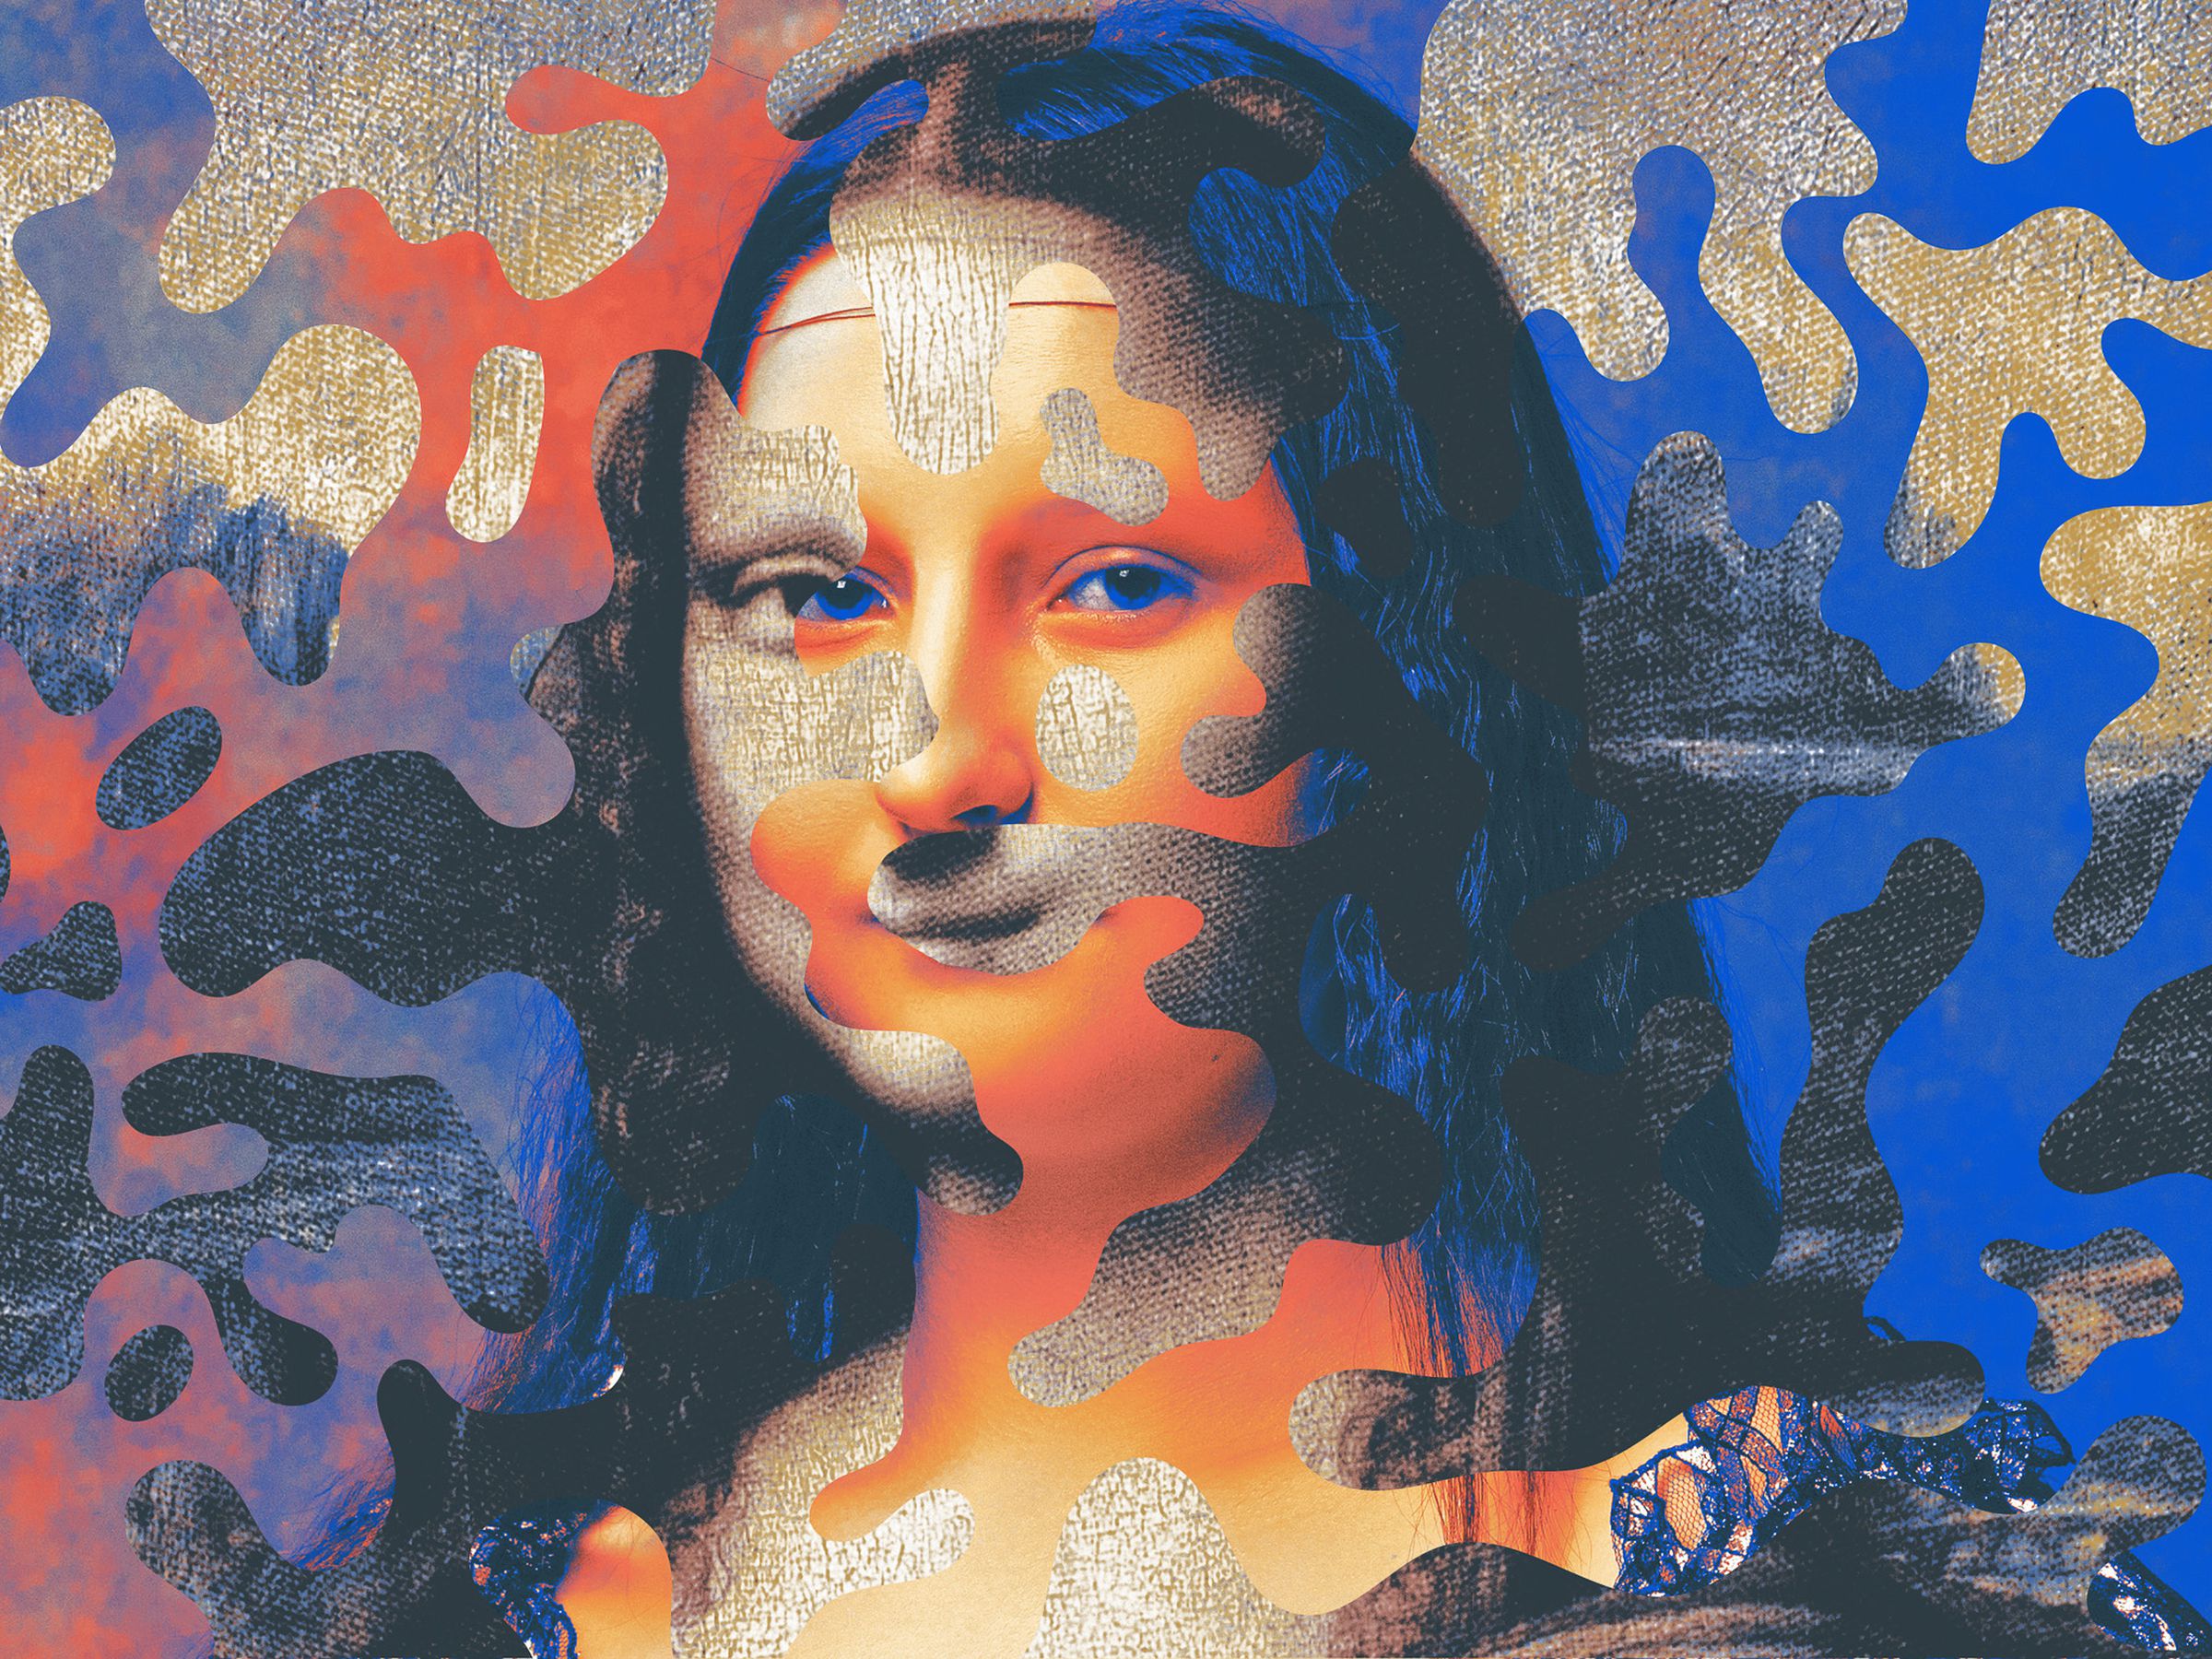 Two images of the Mona Lisa each in a different art style, one classical, the other more modern abstract with vibrant colors.